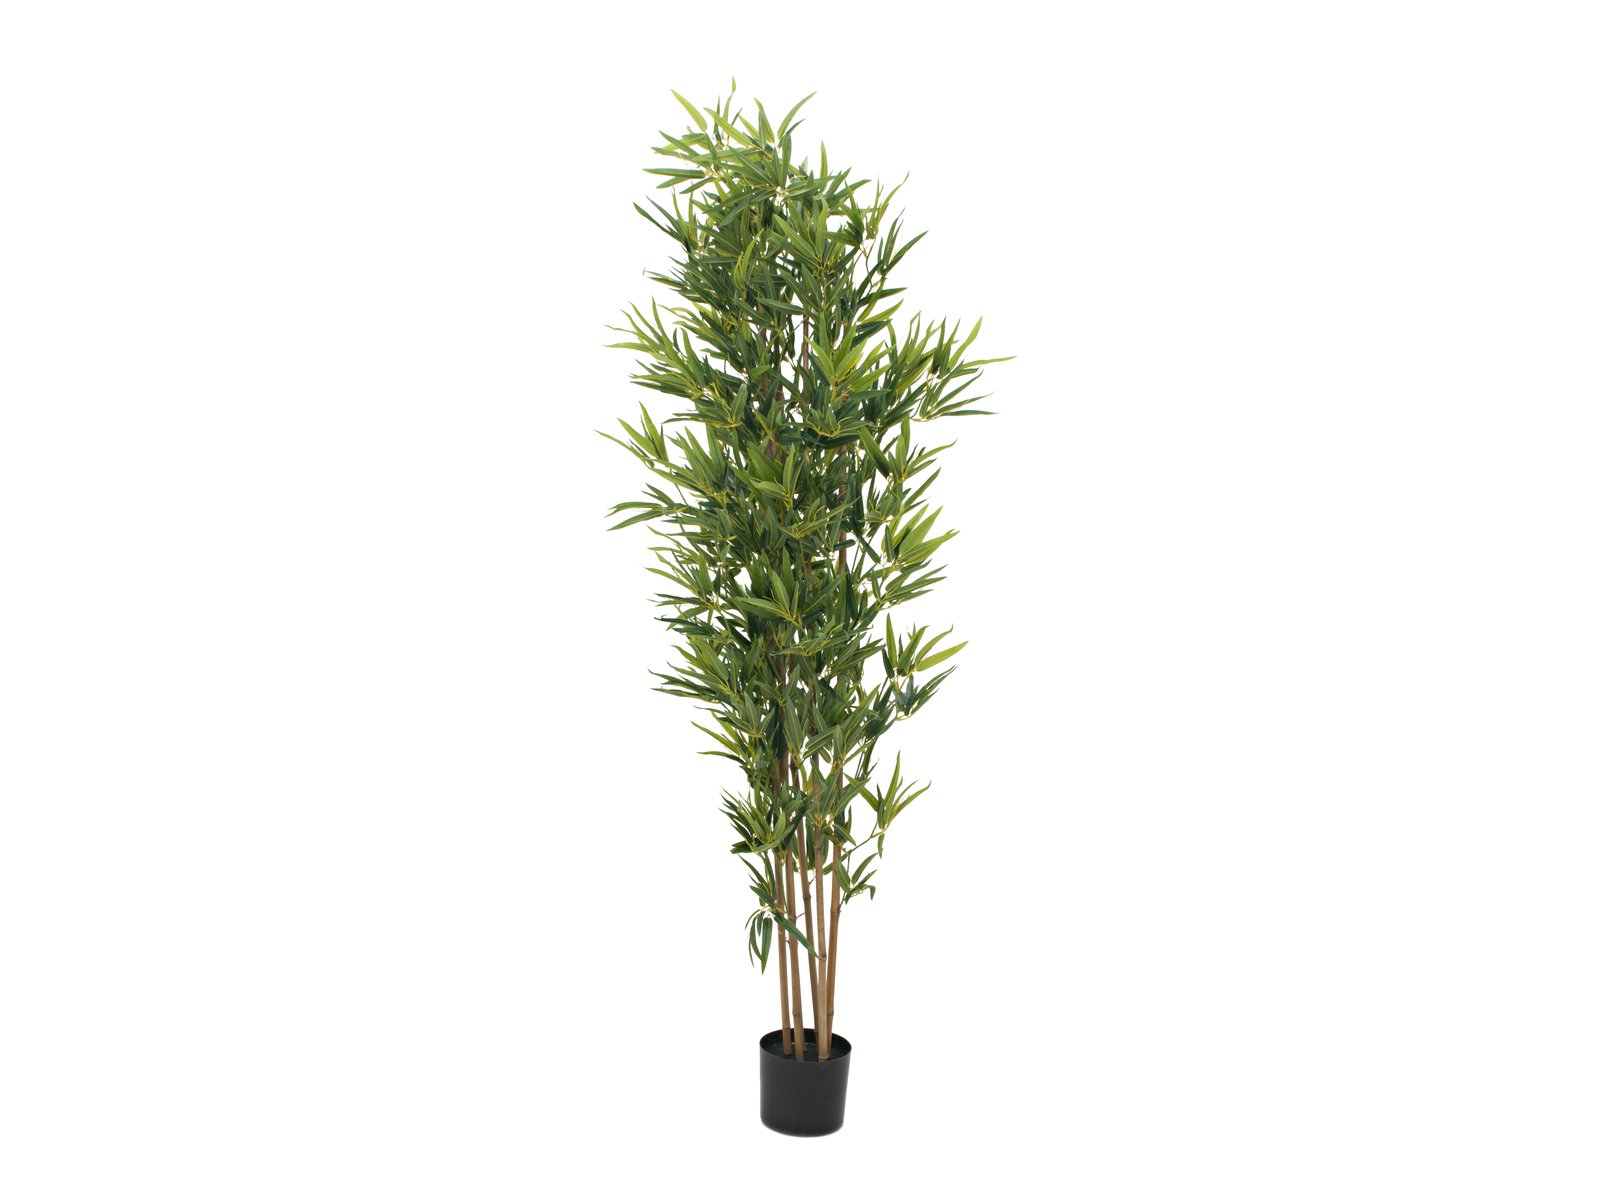 EUROPALMS Bamboo deluxe, artificial plant, 180cm